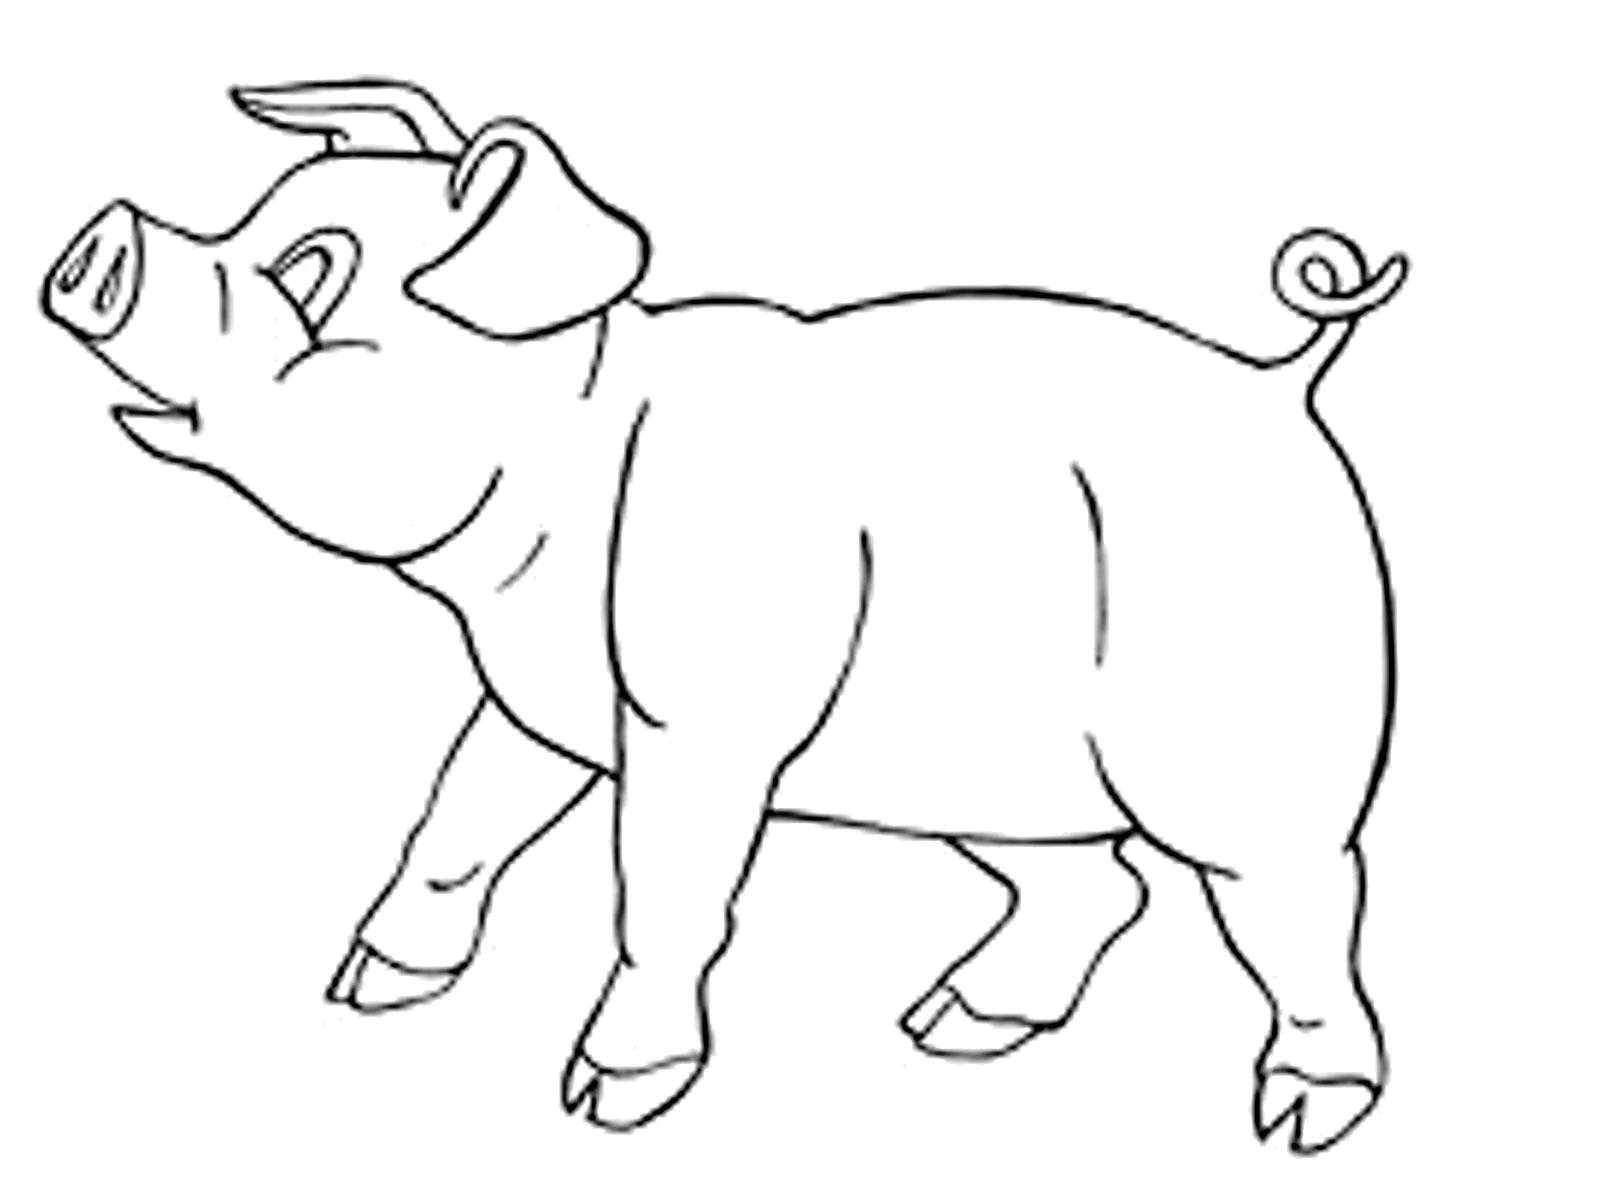 Coloring Pig. Category Pets allowed. Tags:  the pig.